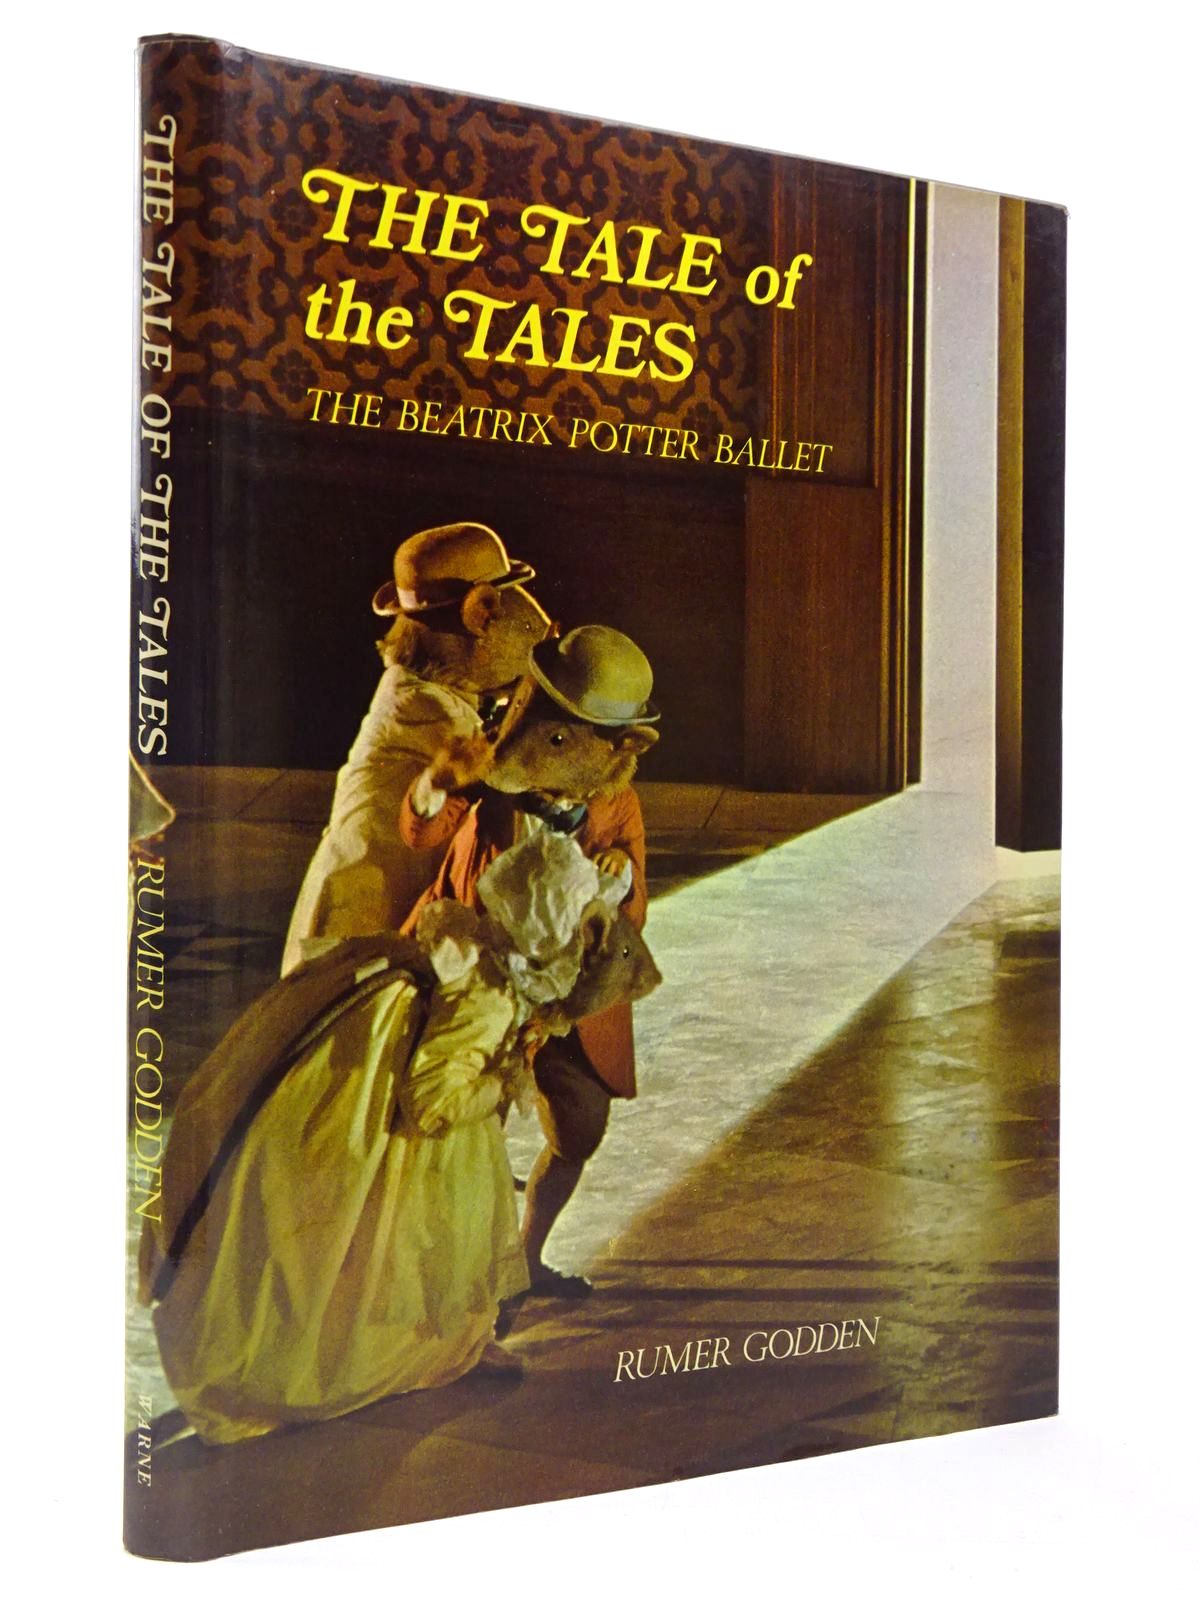 Photo of THE TALE OF THE TALES written by Potter, Beatrix Godden, Rumer illustrated by Potter, Beatrix published by Frederick Warne (STOCK CODE: 2129871)  for sale by Stella & Rose's Books